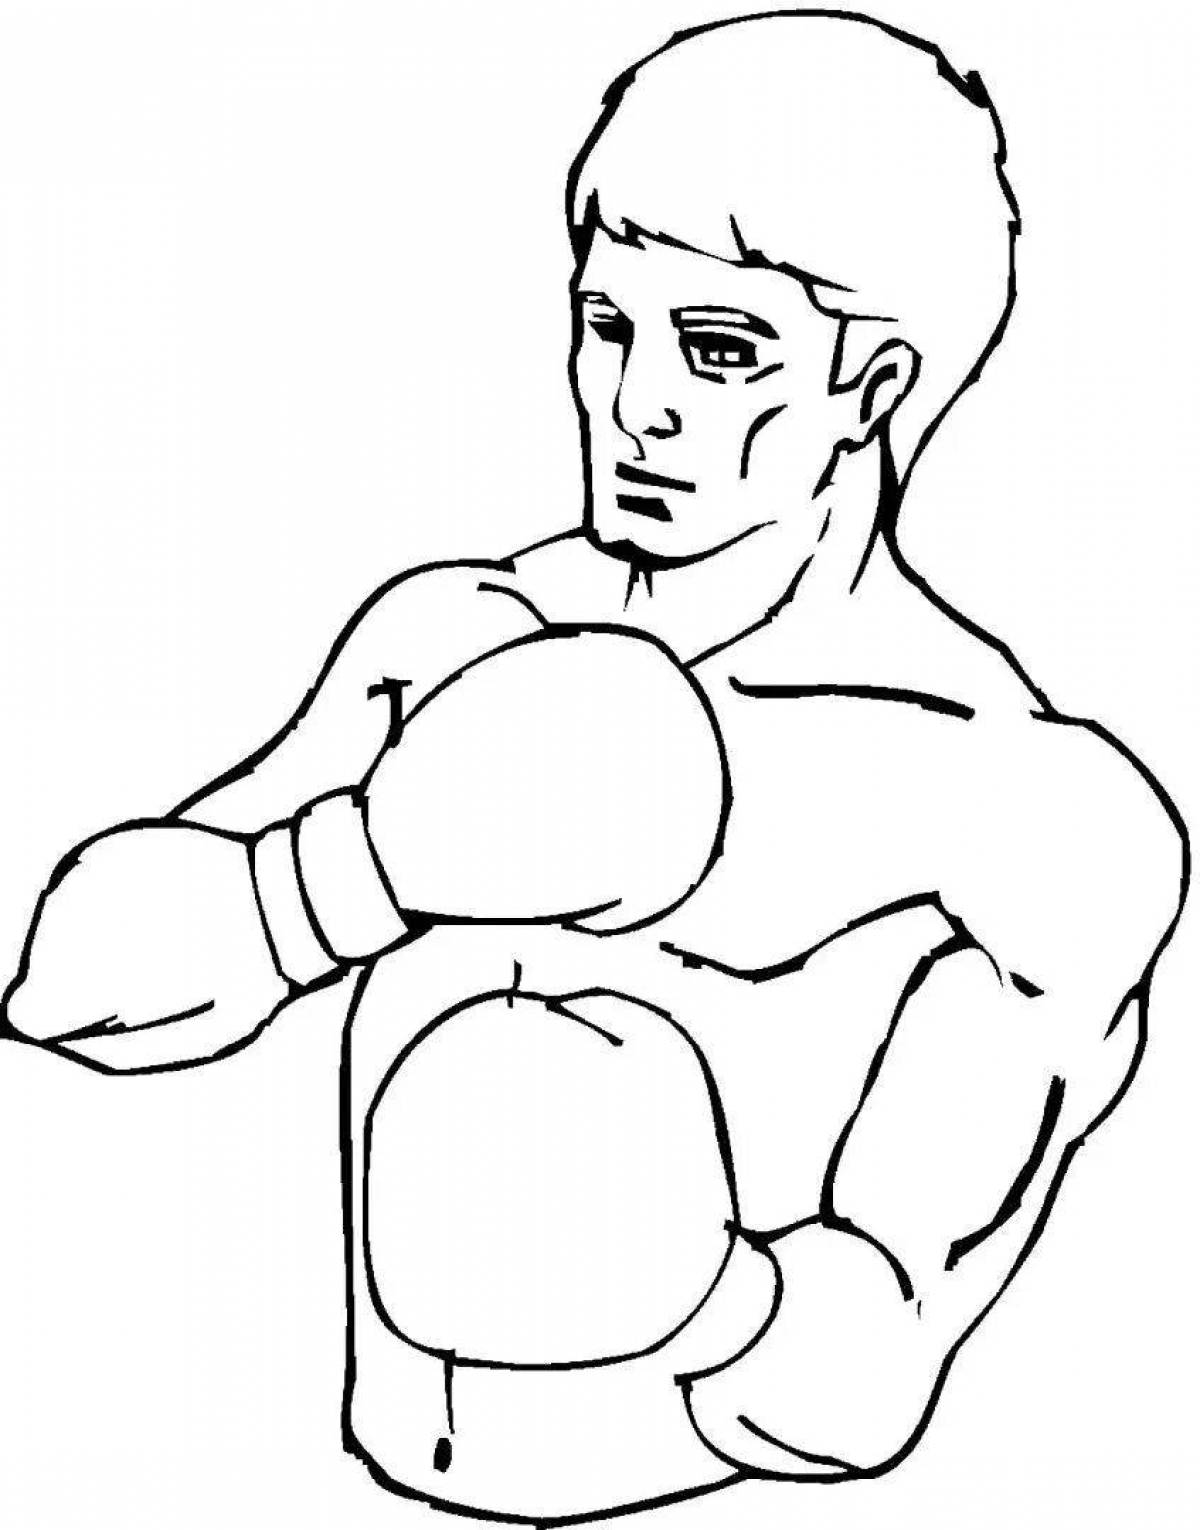 Amazing boxing and boo coloring page for kids